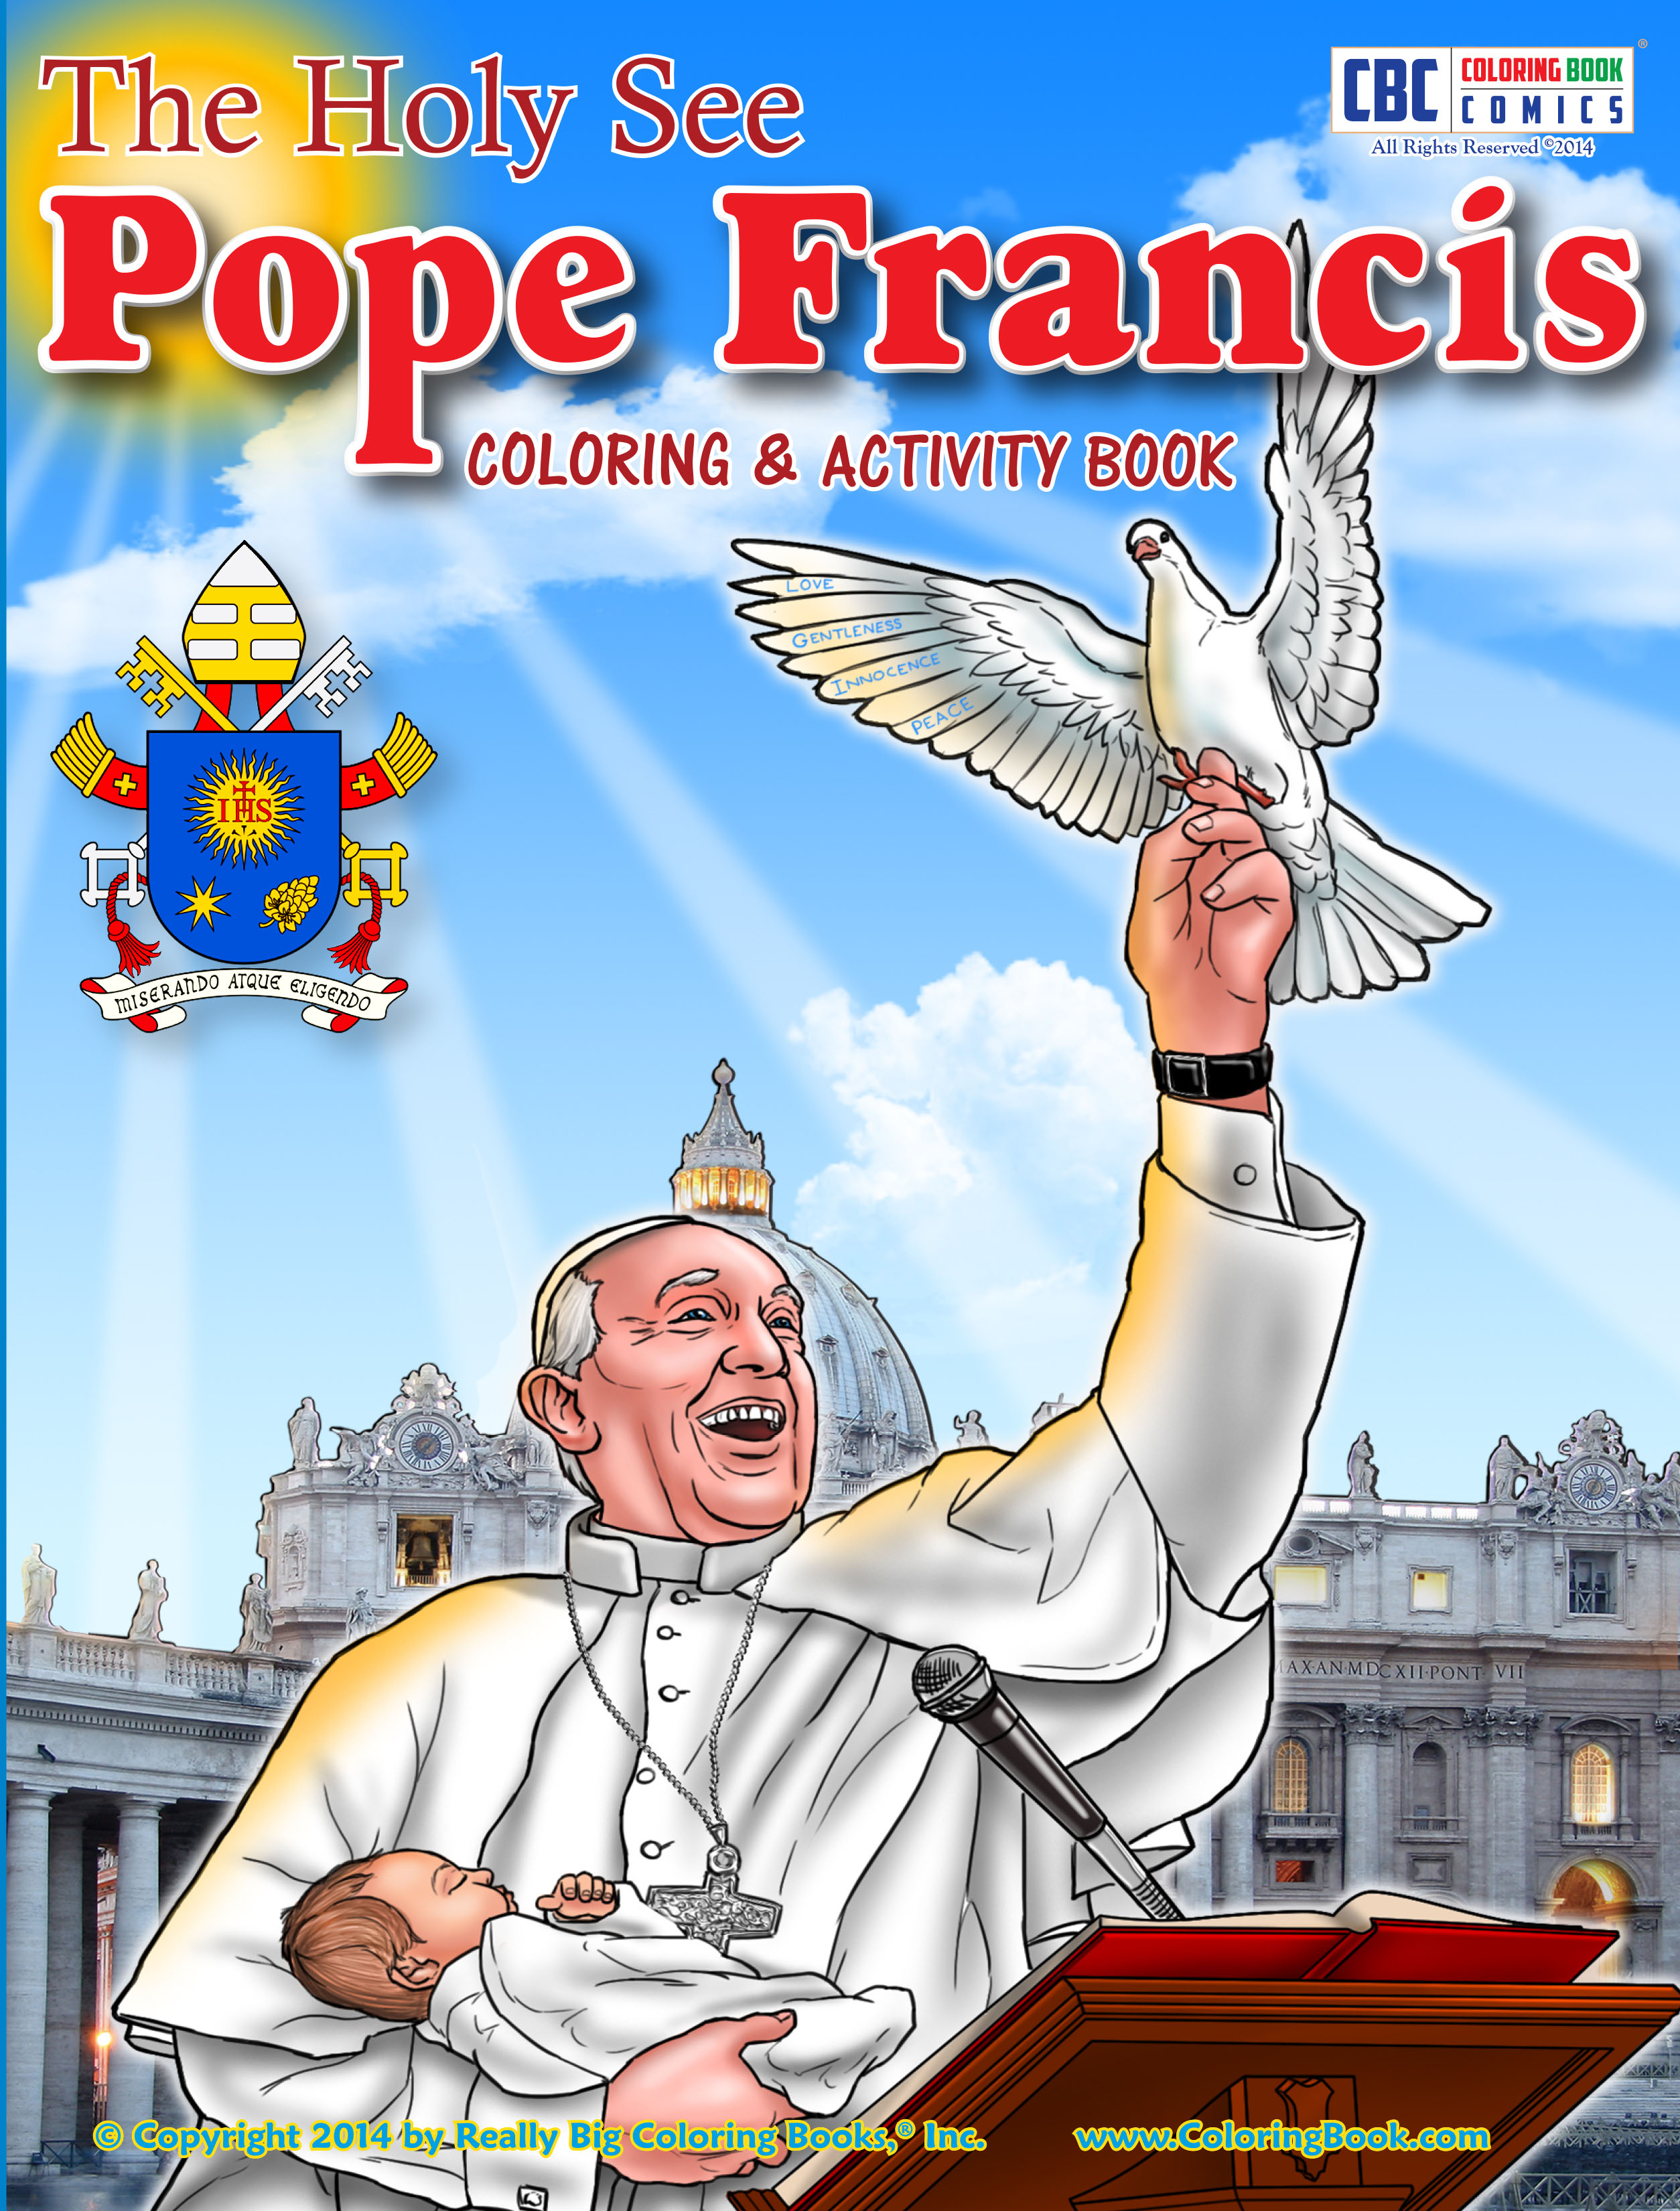 The Pope Francis Coloring and Activity Book